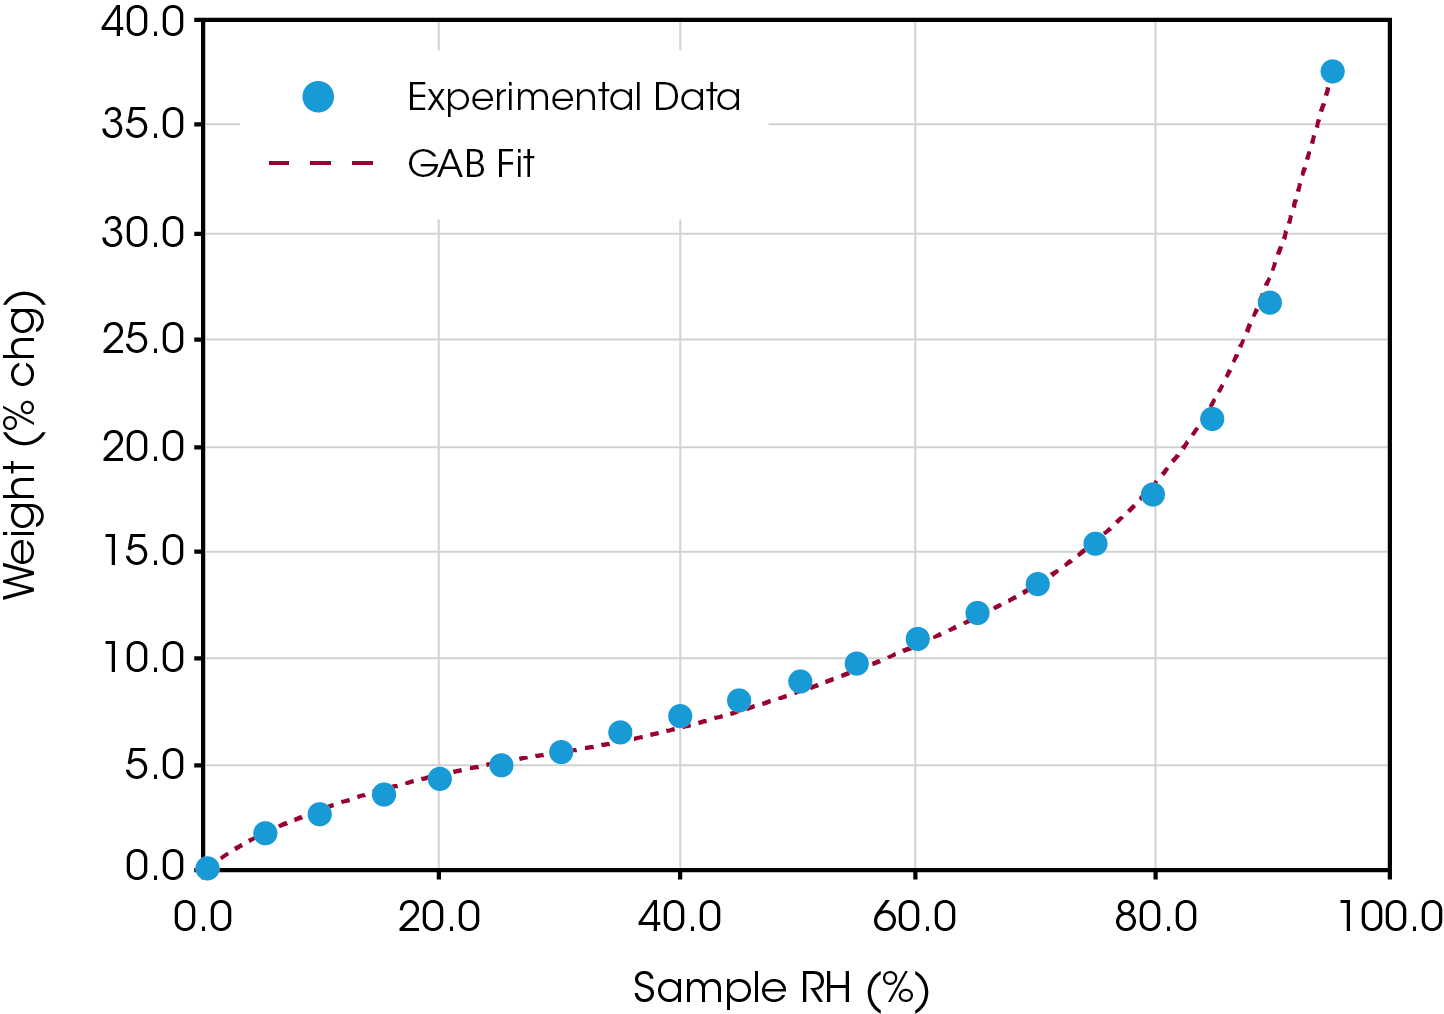 Figure 2. Overlay of theoretical fit GAB with experimental data.